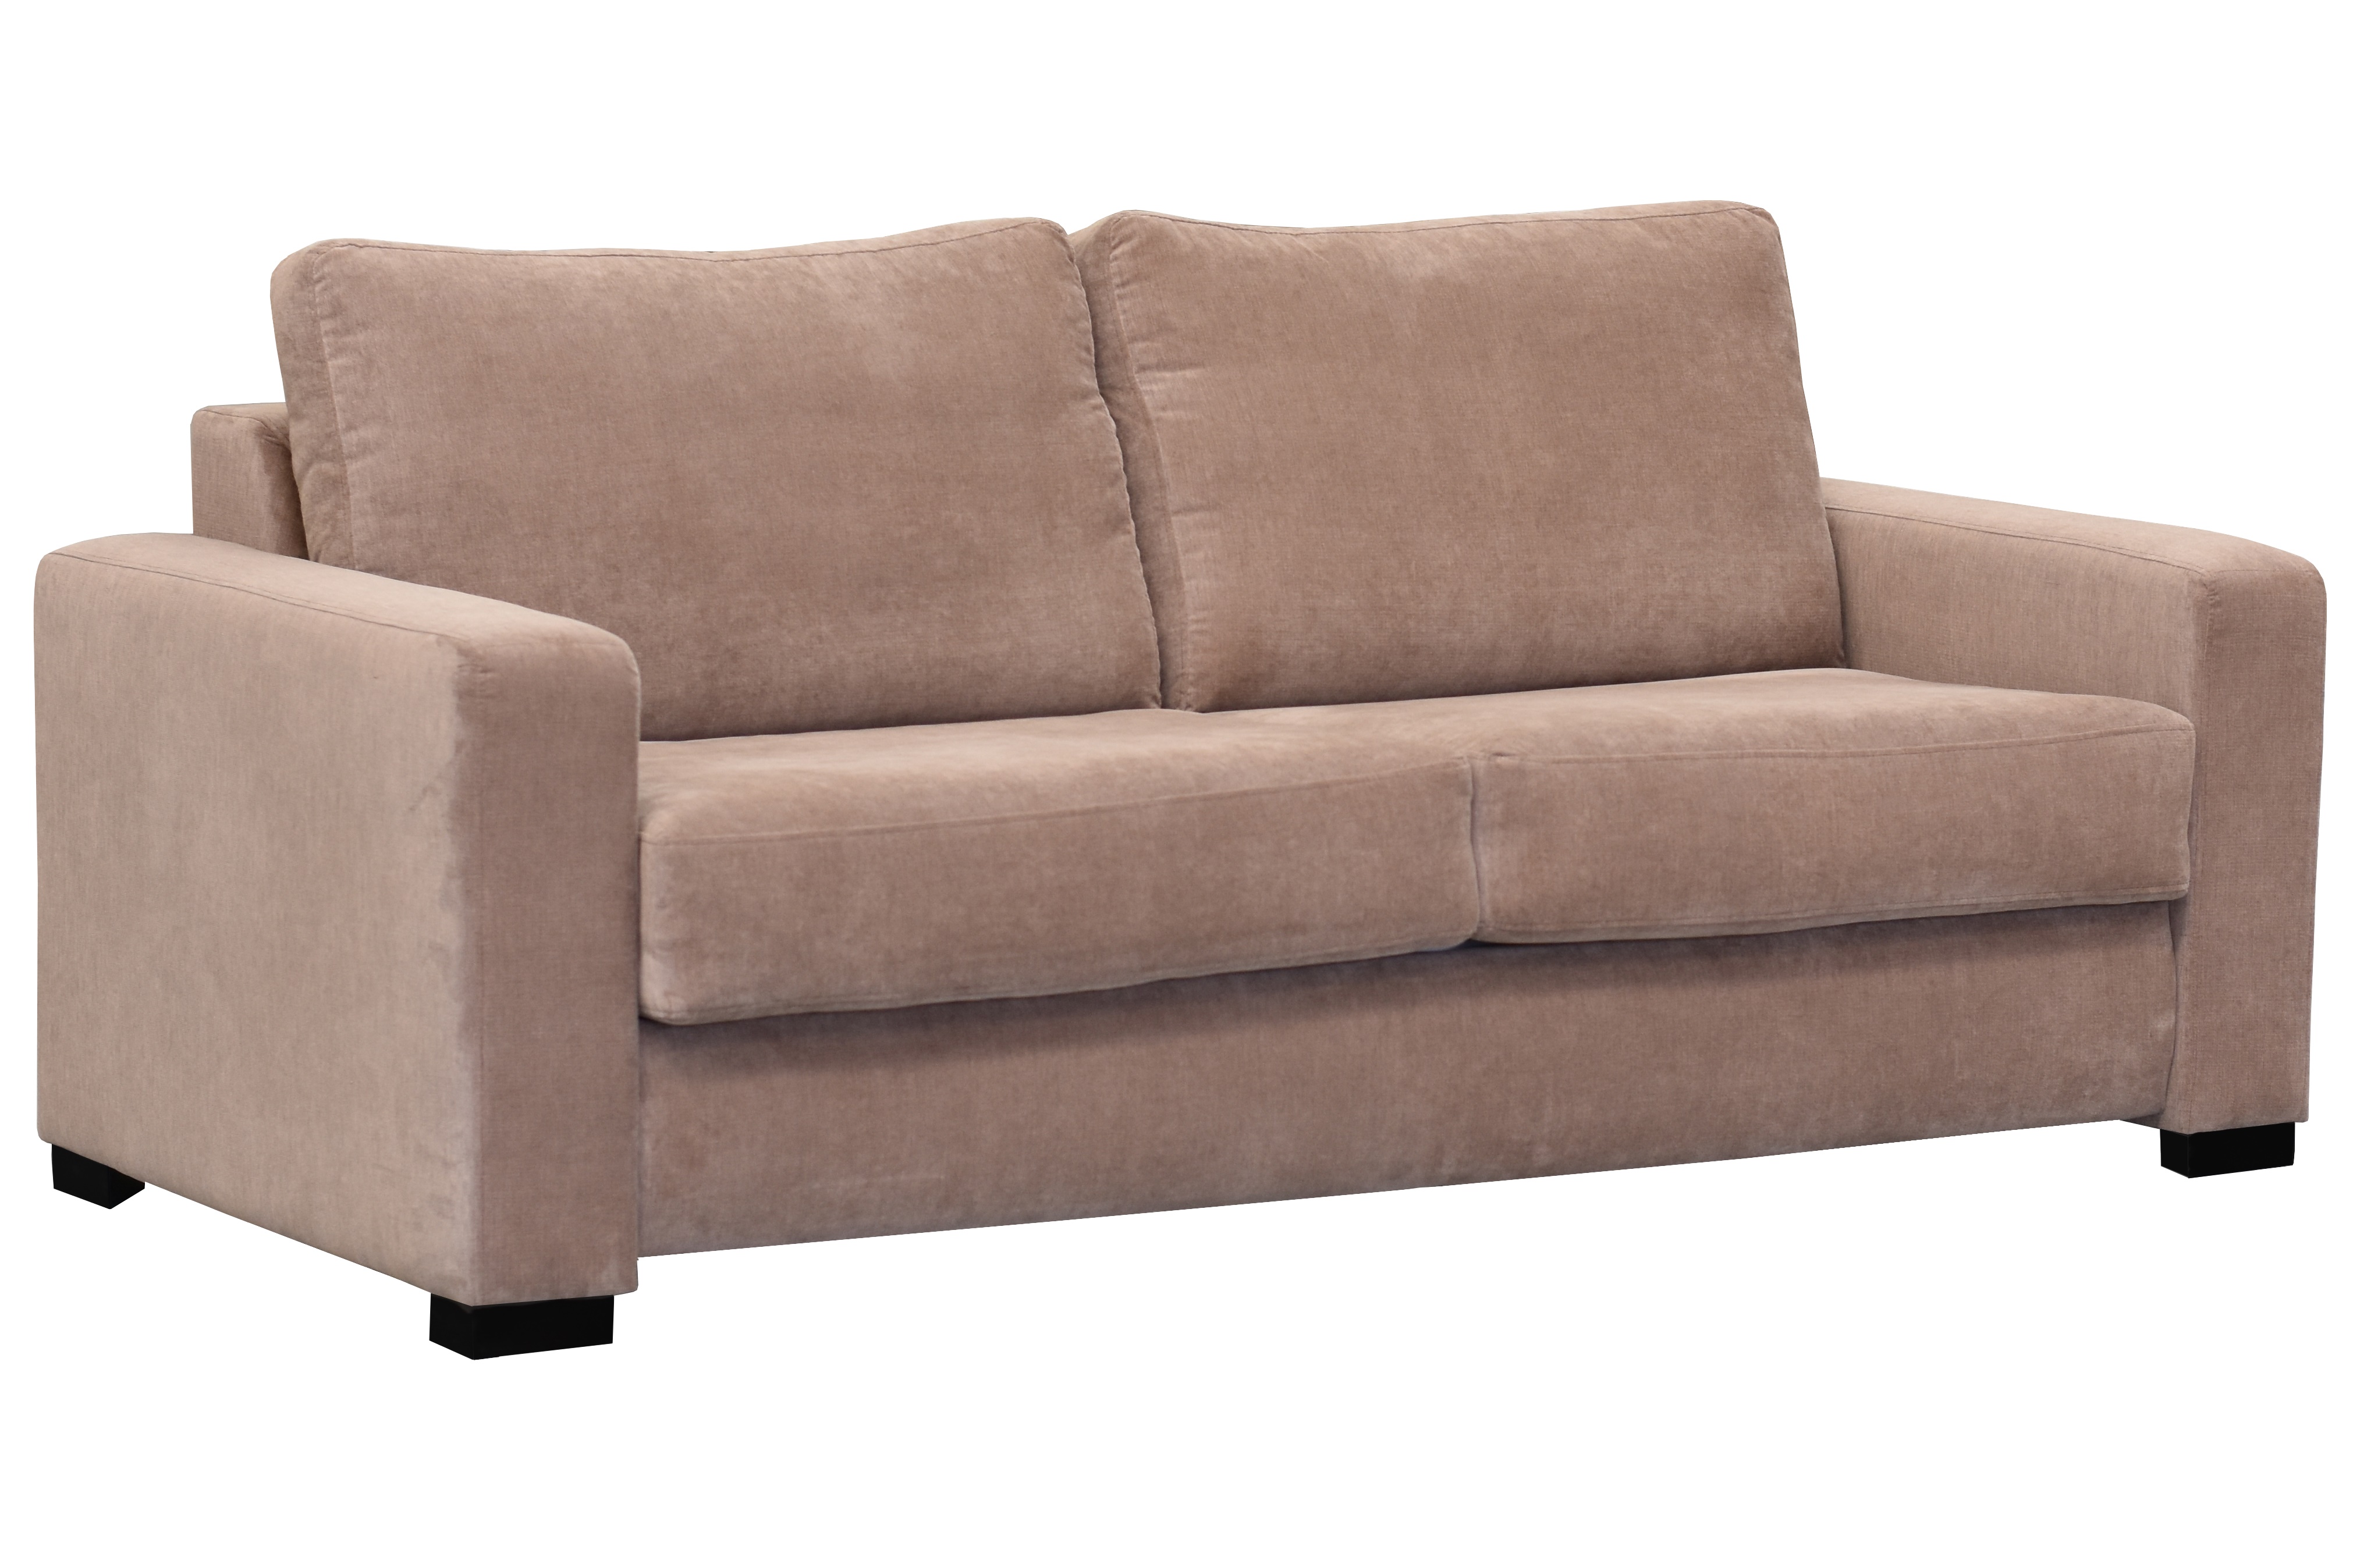 3-seater sofa bed